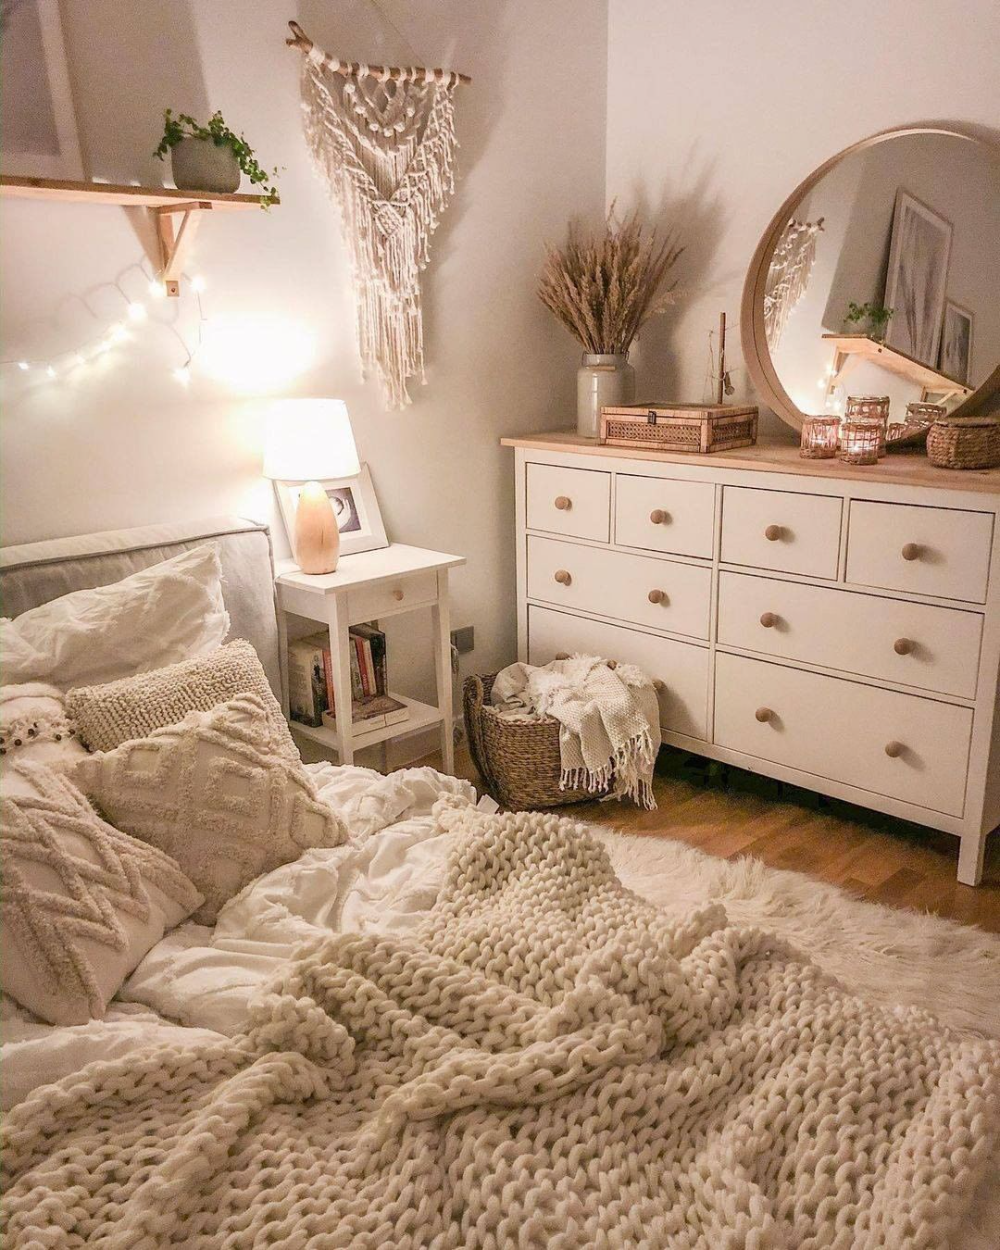 Teen girls bedroom ideas should be one of a kind